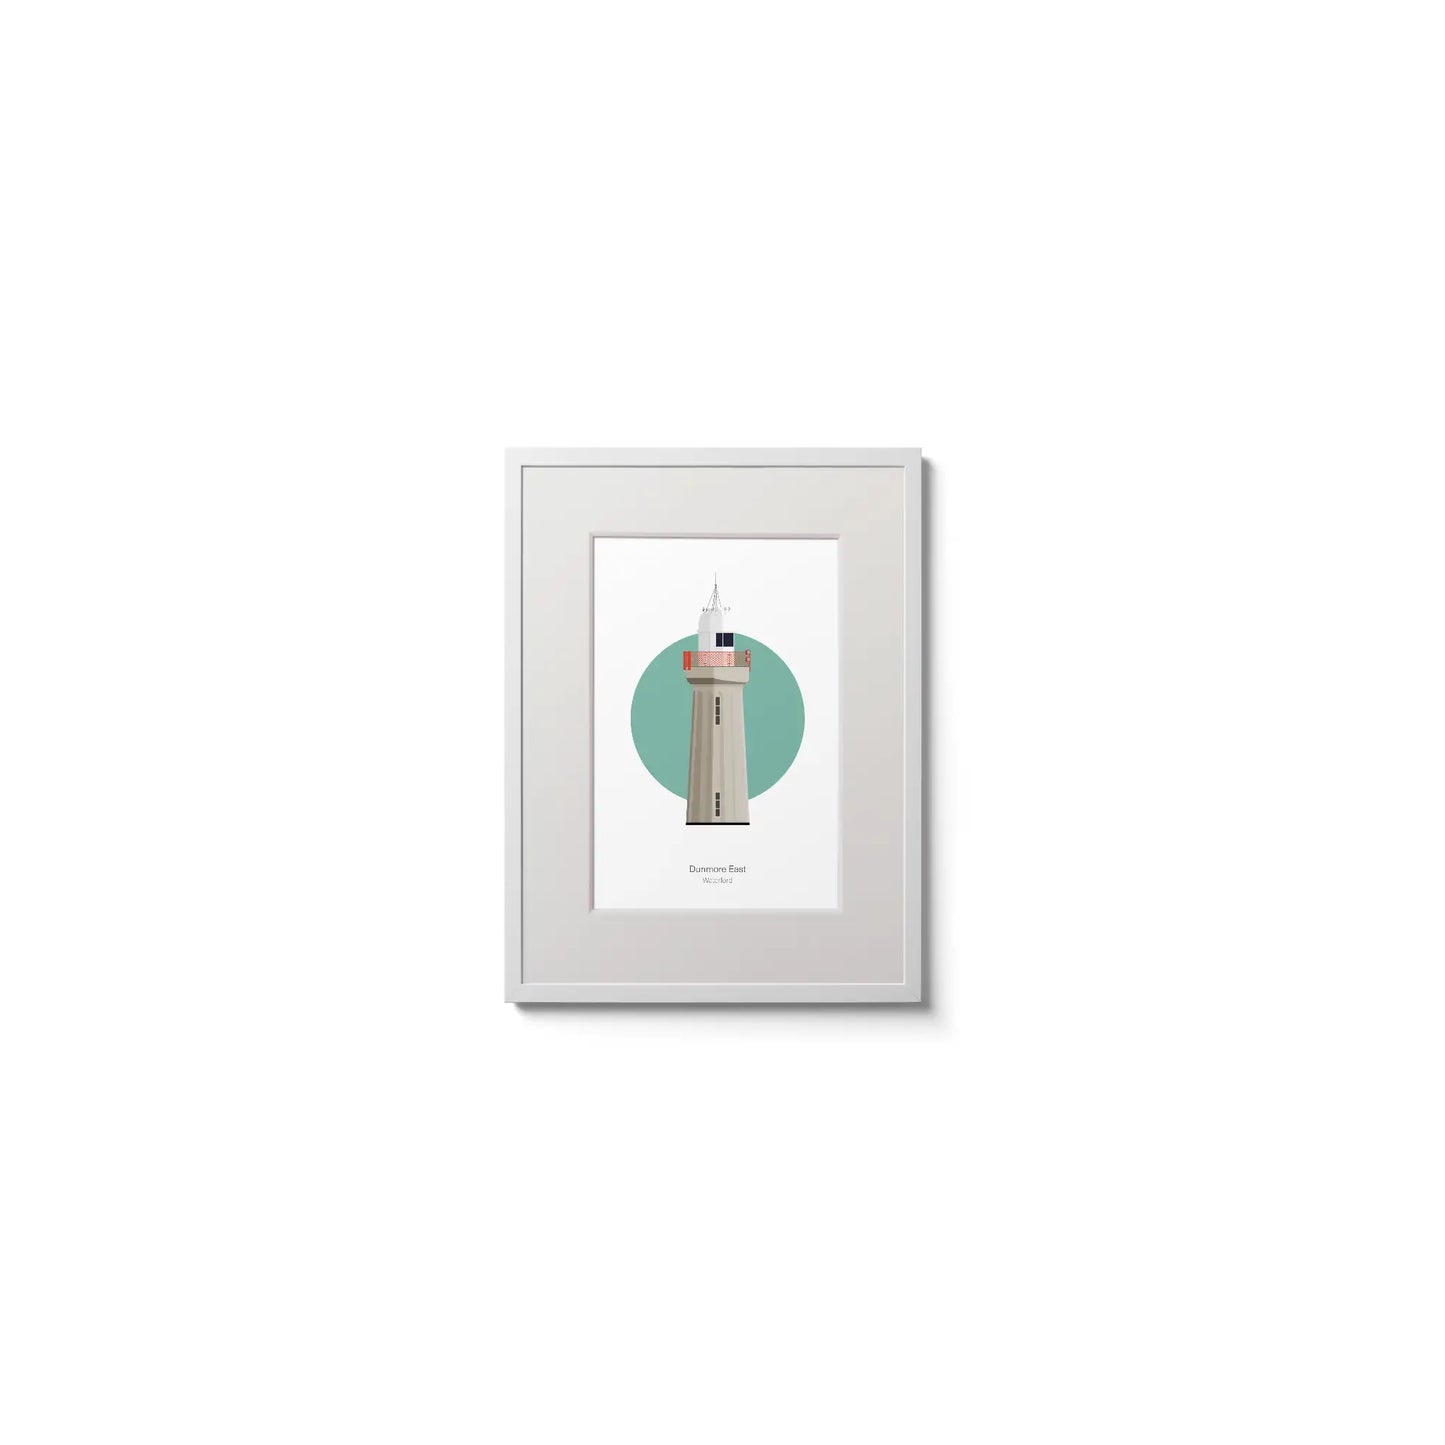 Illustration of Dunmore East lighthouse on a white background inside light blue square,  in a white frame measuring 15x20cm.